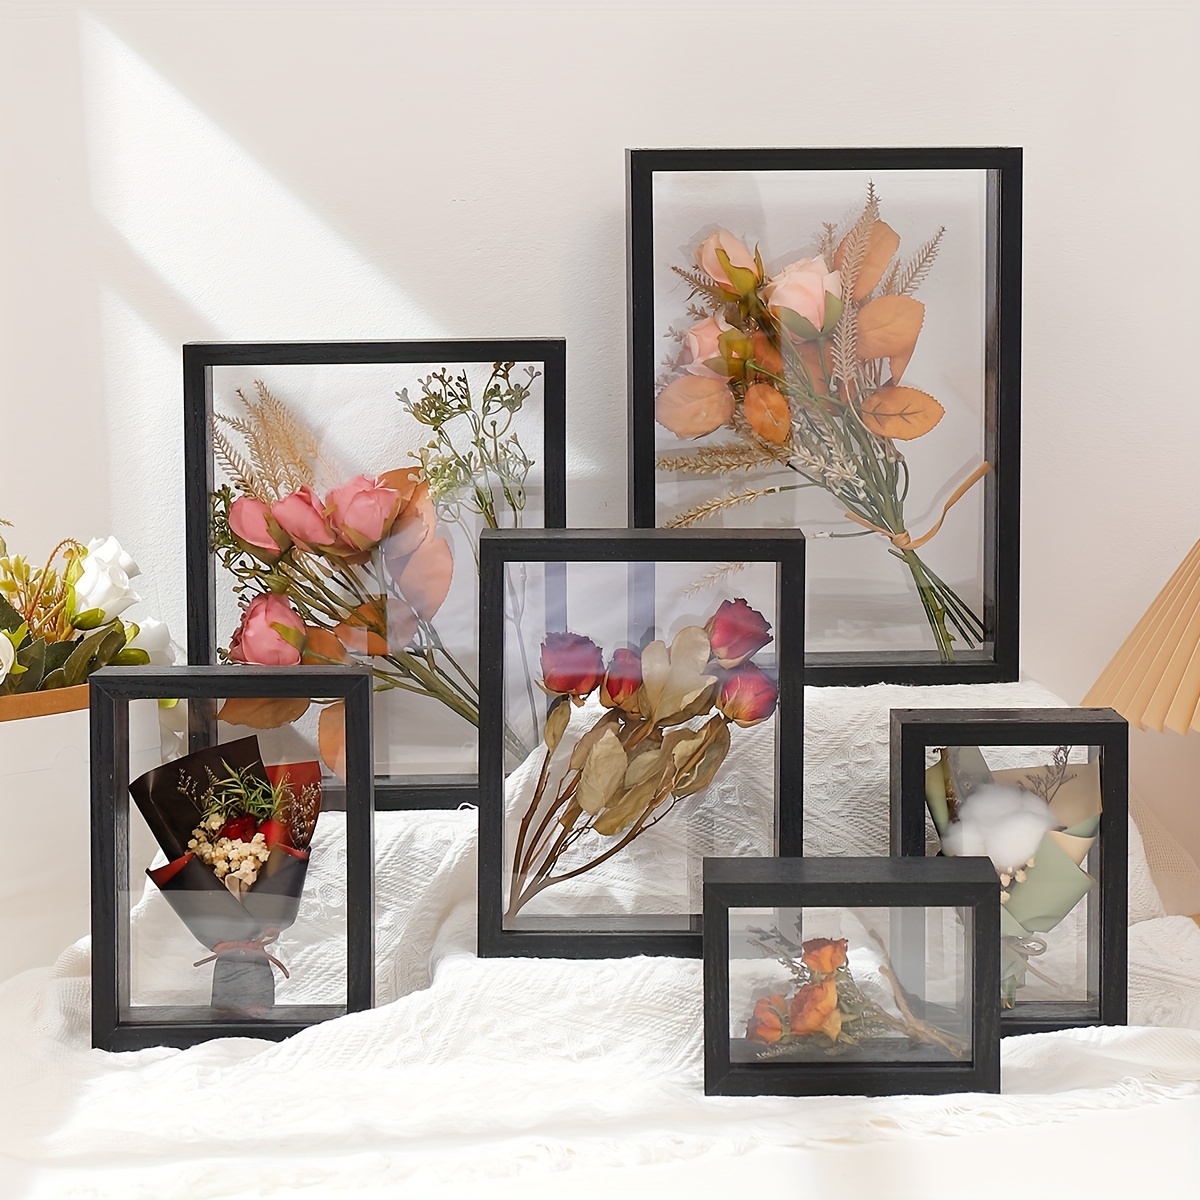  Glass Frame for Pressed Flowers, Leaf and Artwork - Hanging  Gold 6x6 Square Metal Picture Frames, Clear Double Glass Floating Frame,  Wall Decor Photo Display, Set of 2 Flower Press